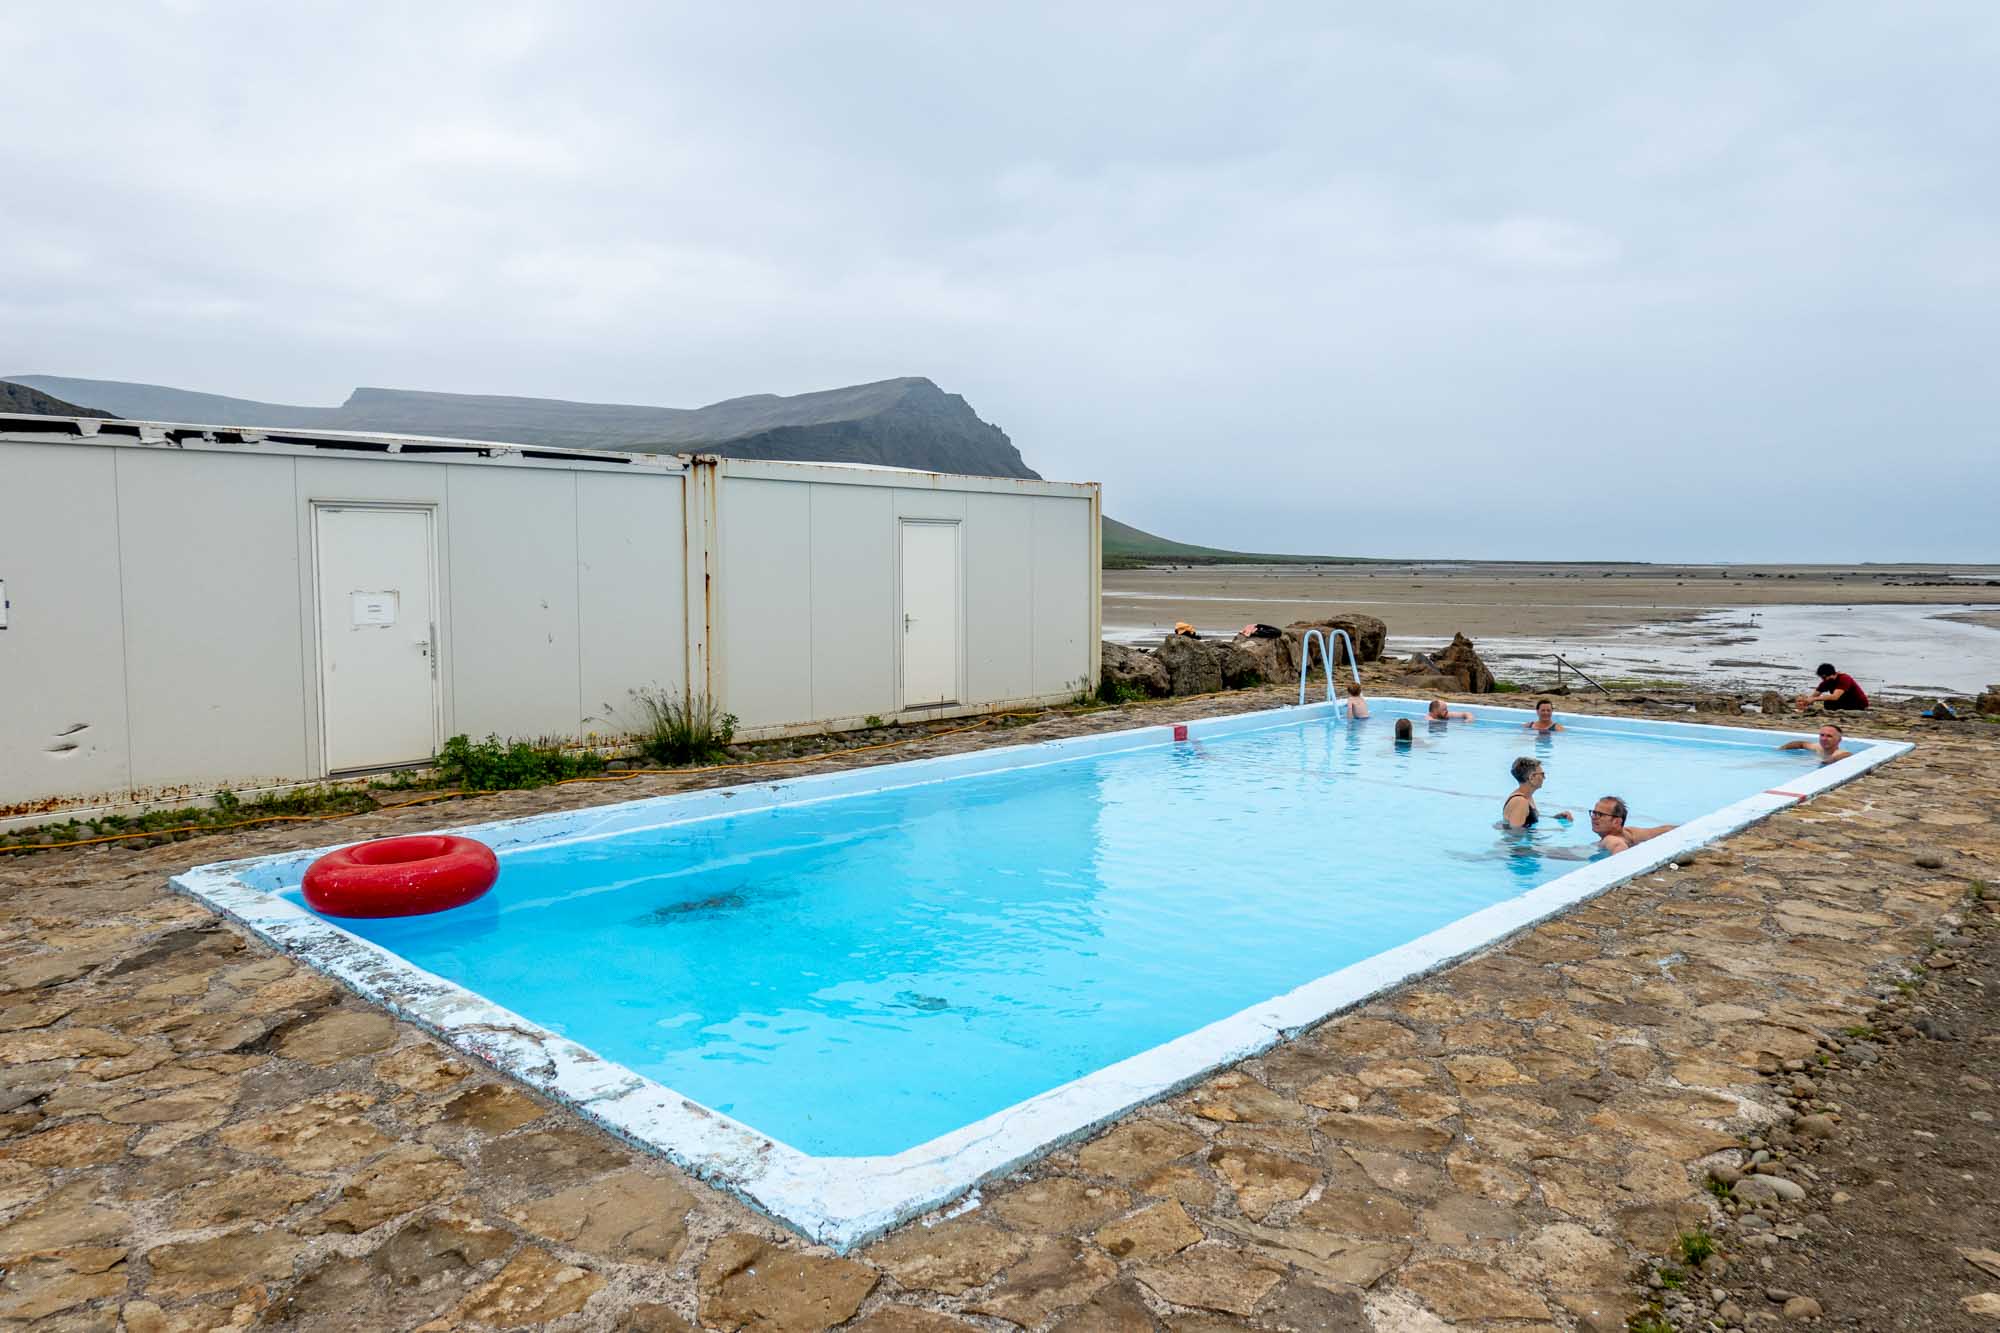 Small blue swimming pool with people in it